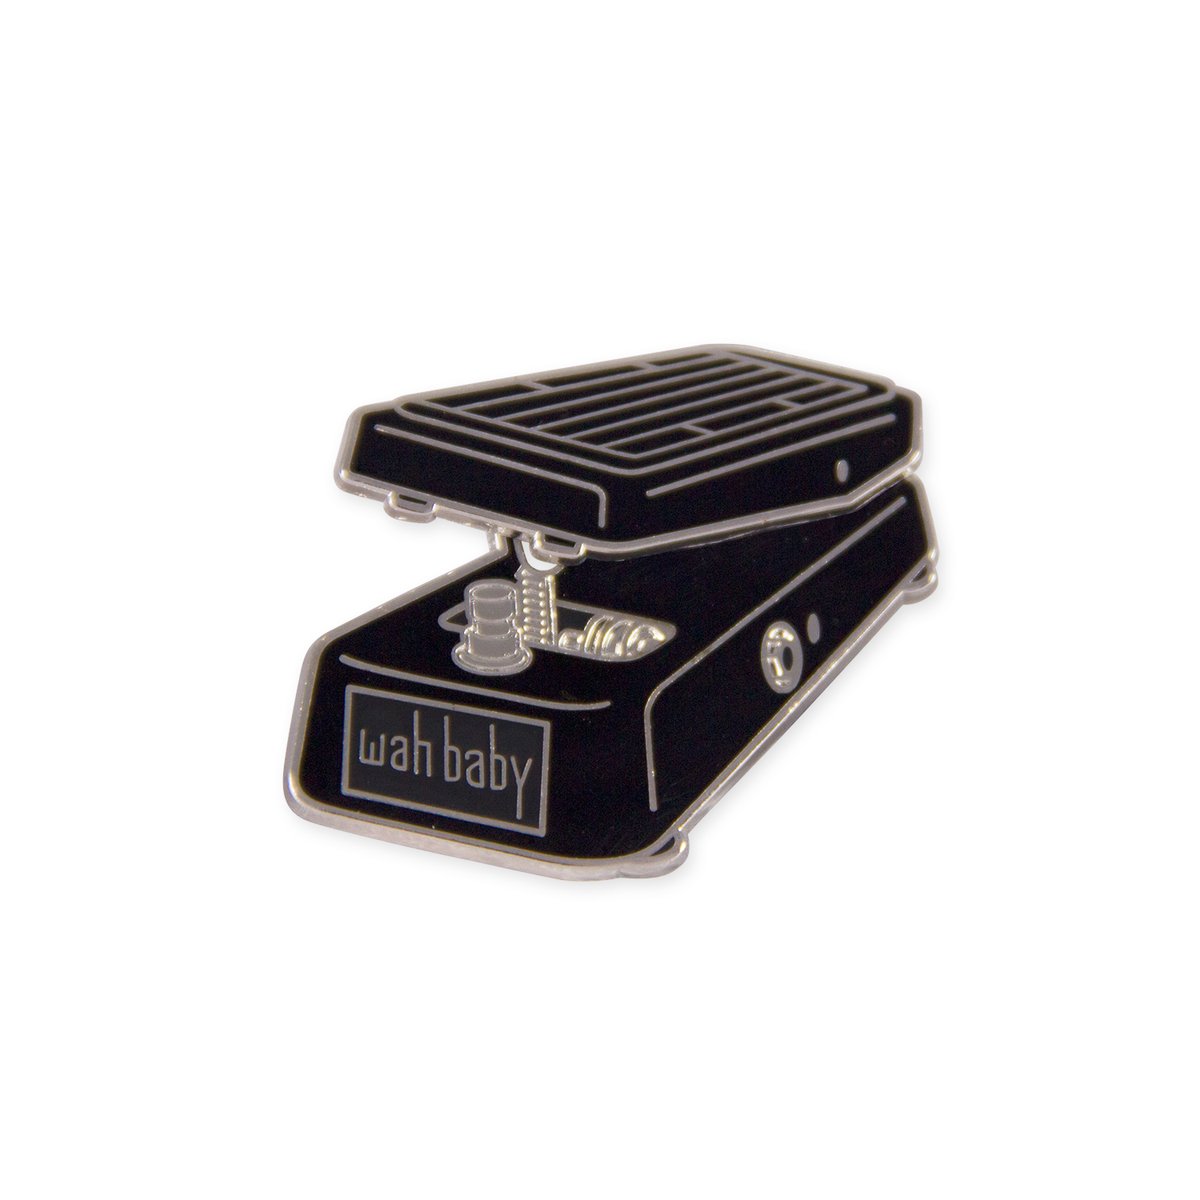 https://assets.bigcartel.com/product_images/214369906/wah-pedal-up.jpg?auto=format&fit=max&h=1200&w=1200